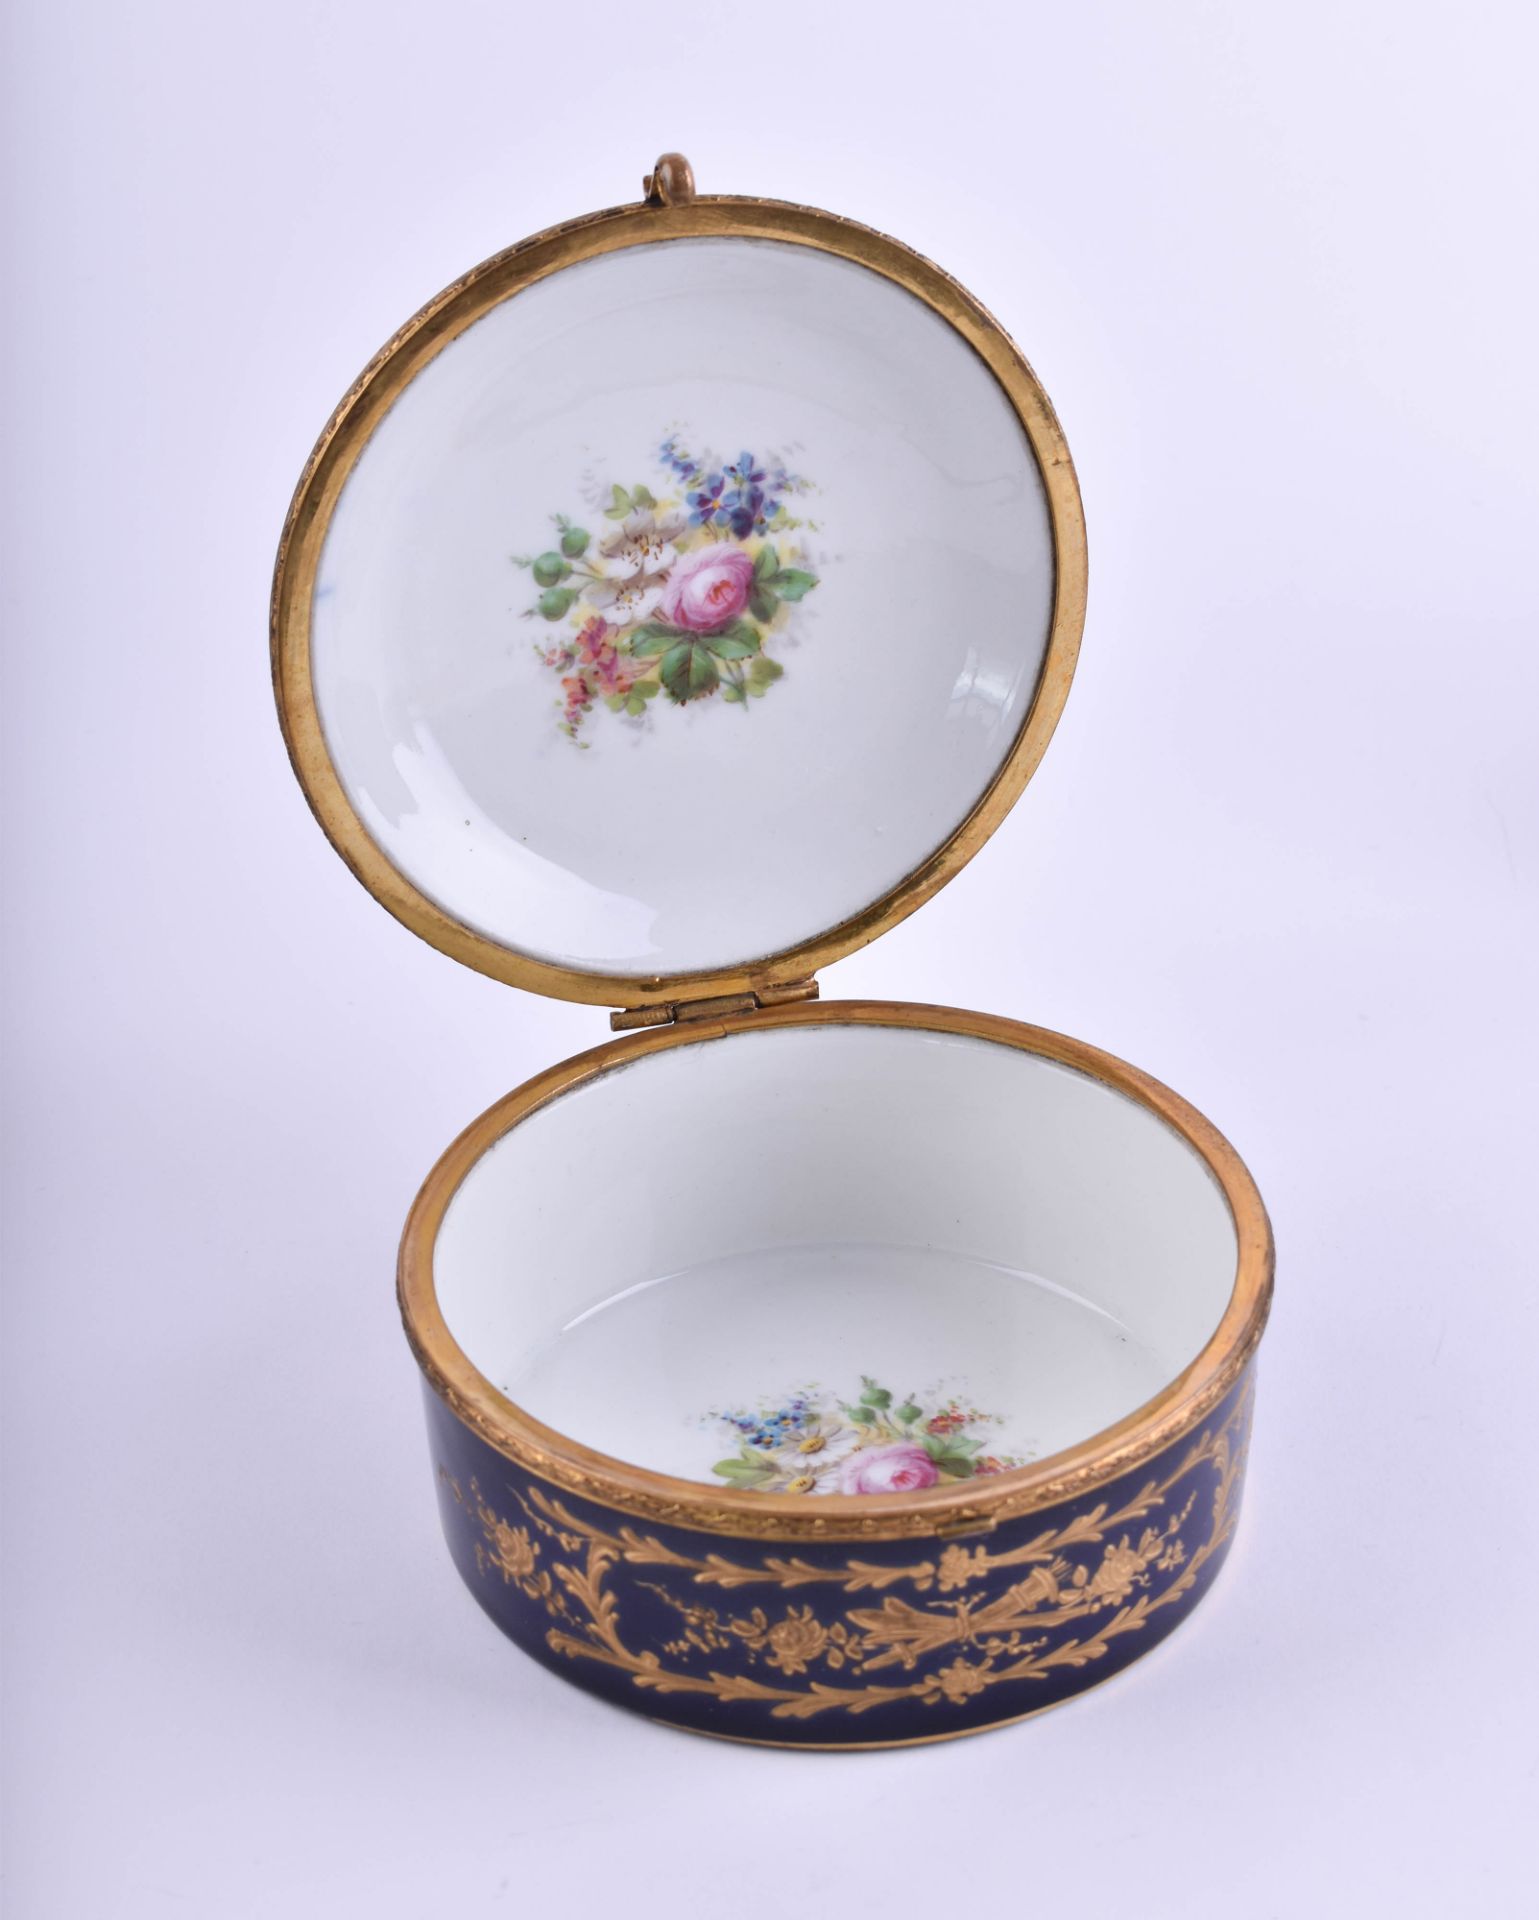  Porcelain cover box Sevres - Image 6 of 6